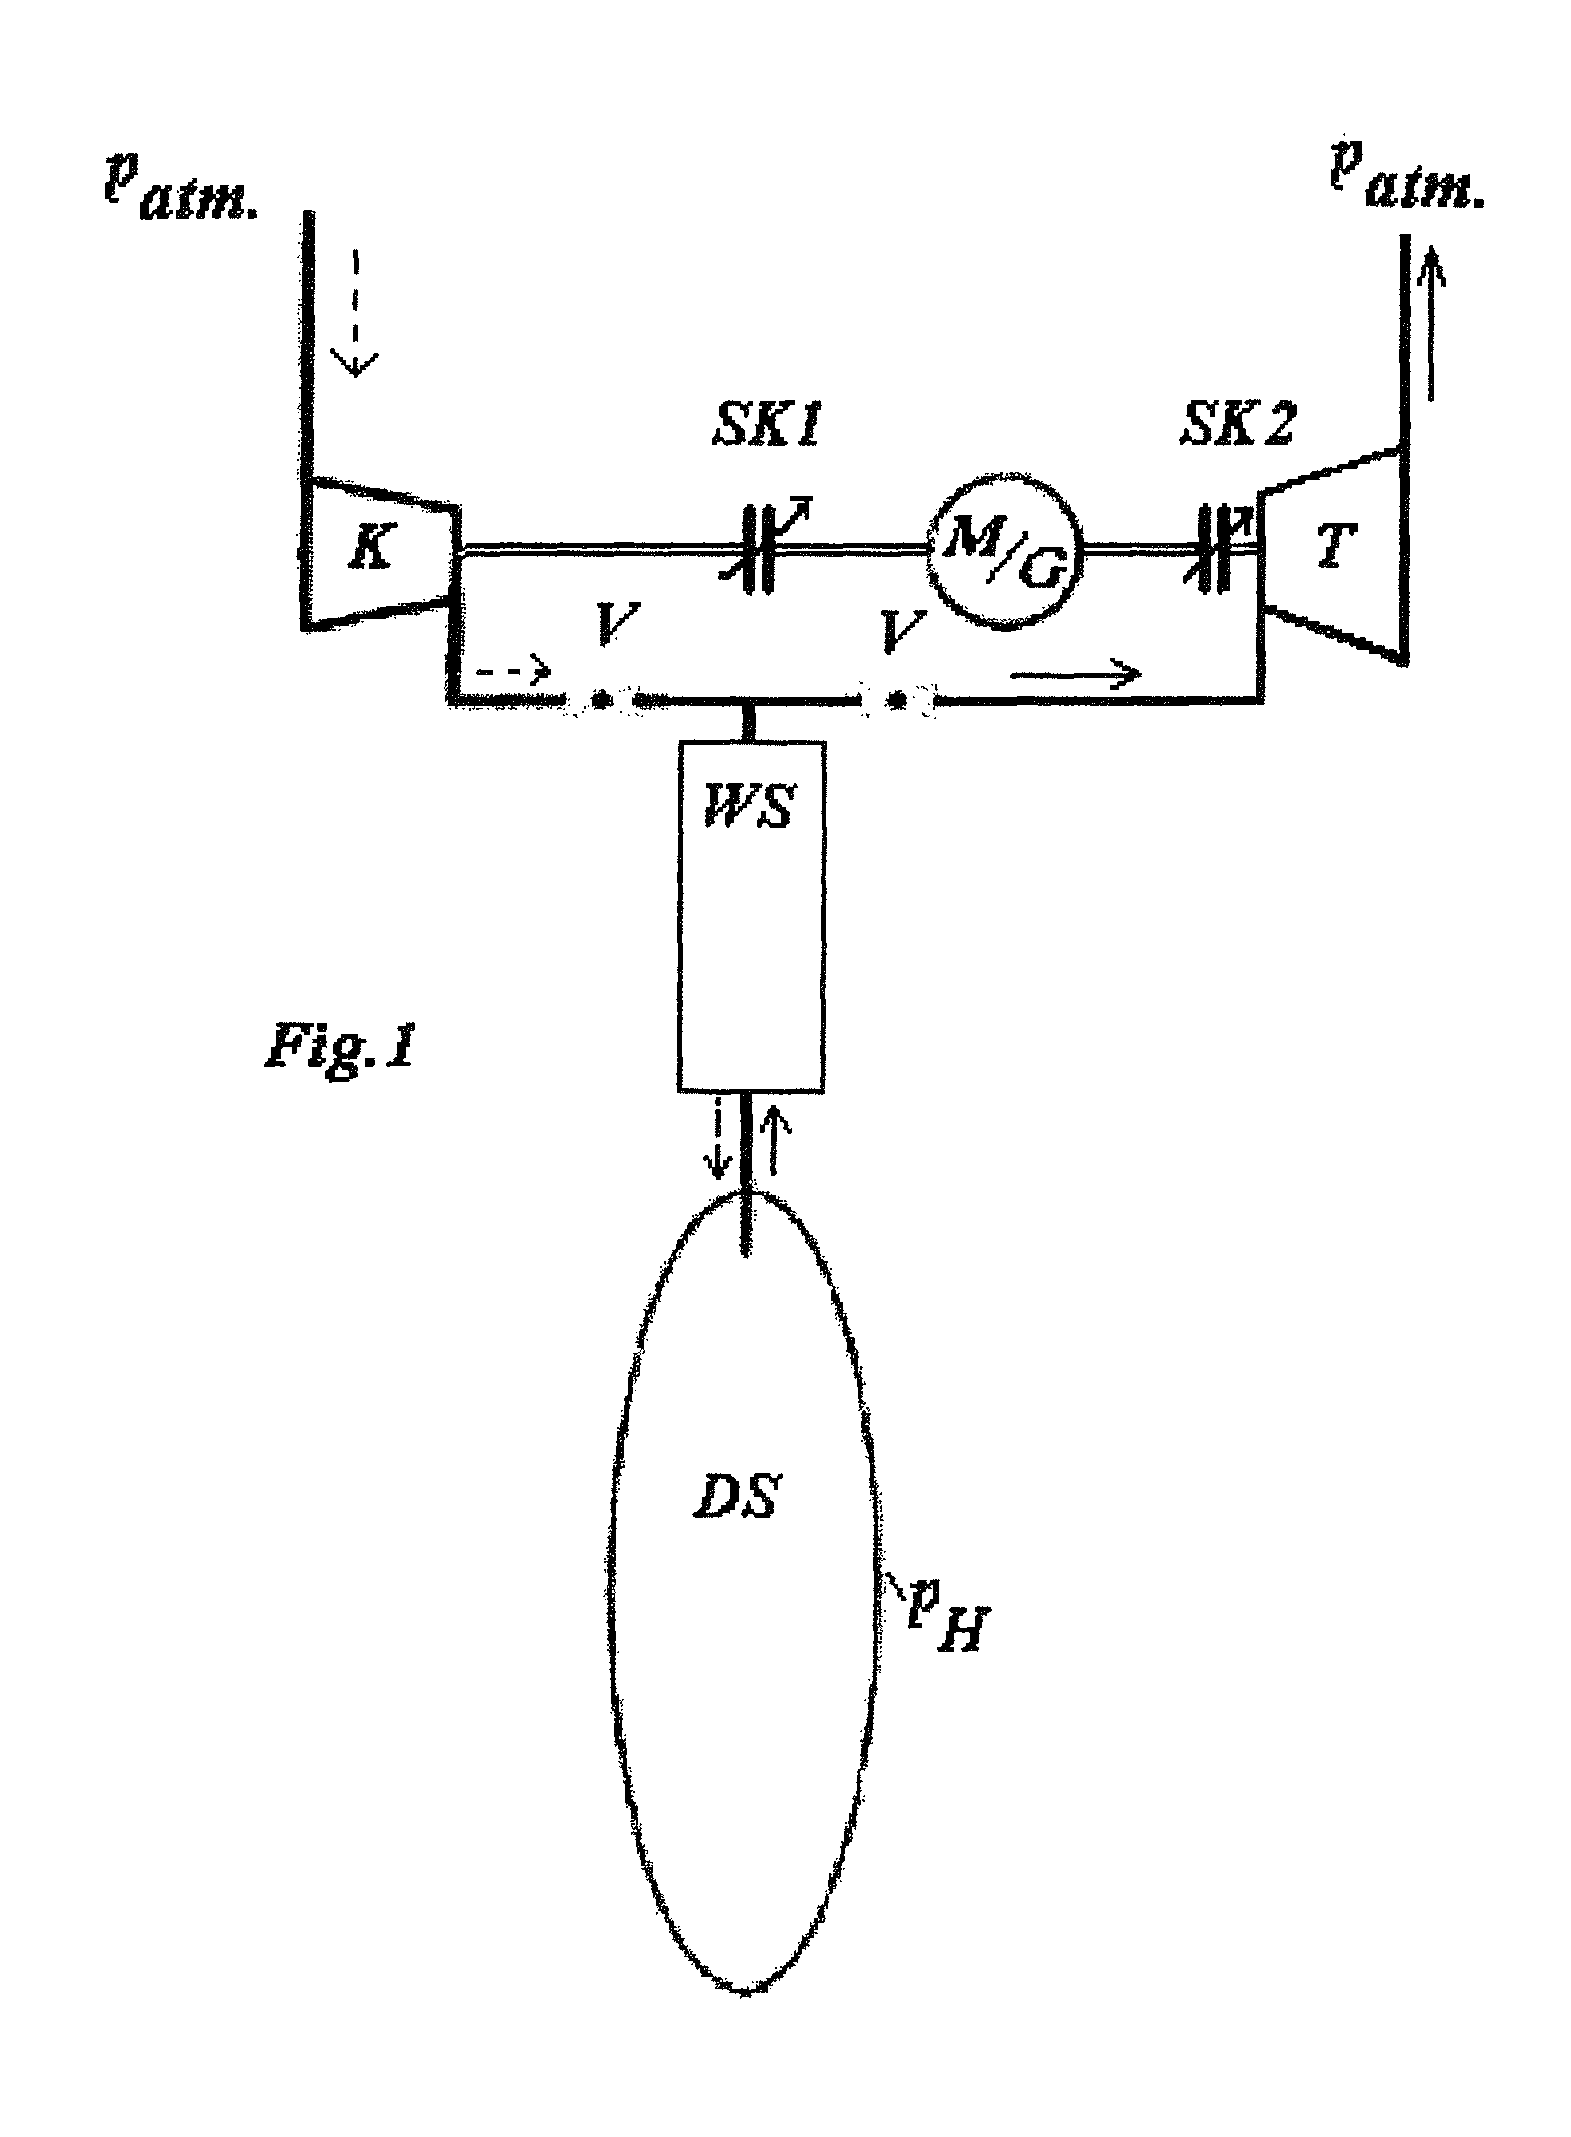 System for storing energy by means of compressed air